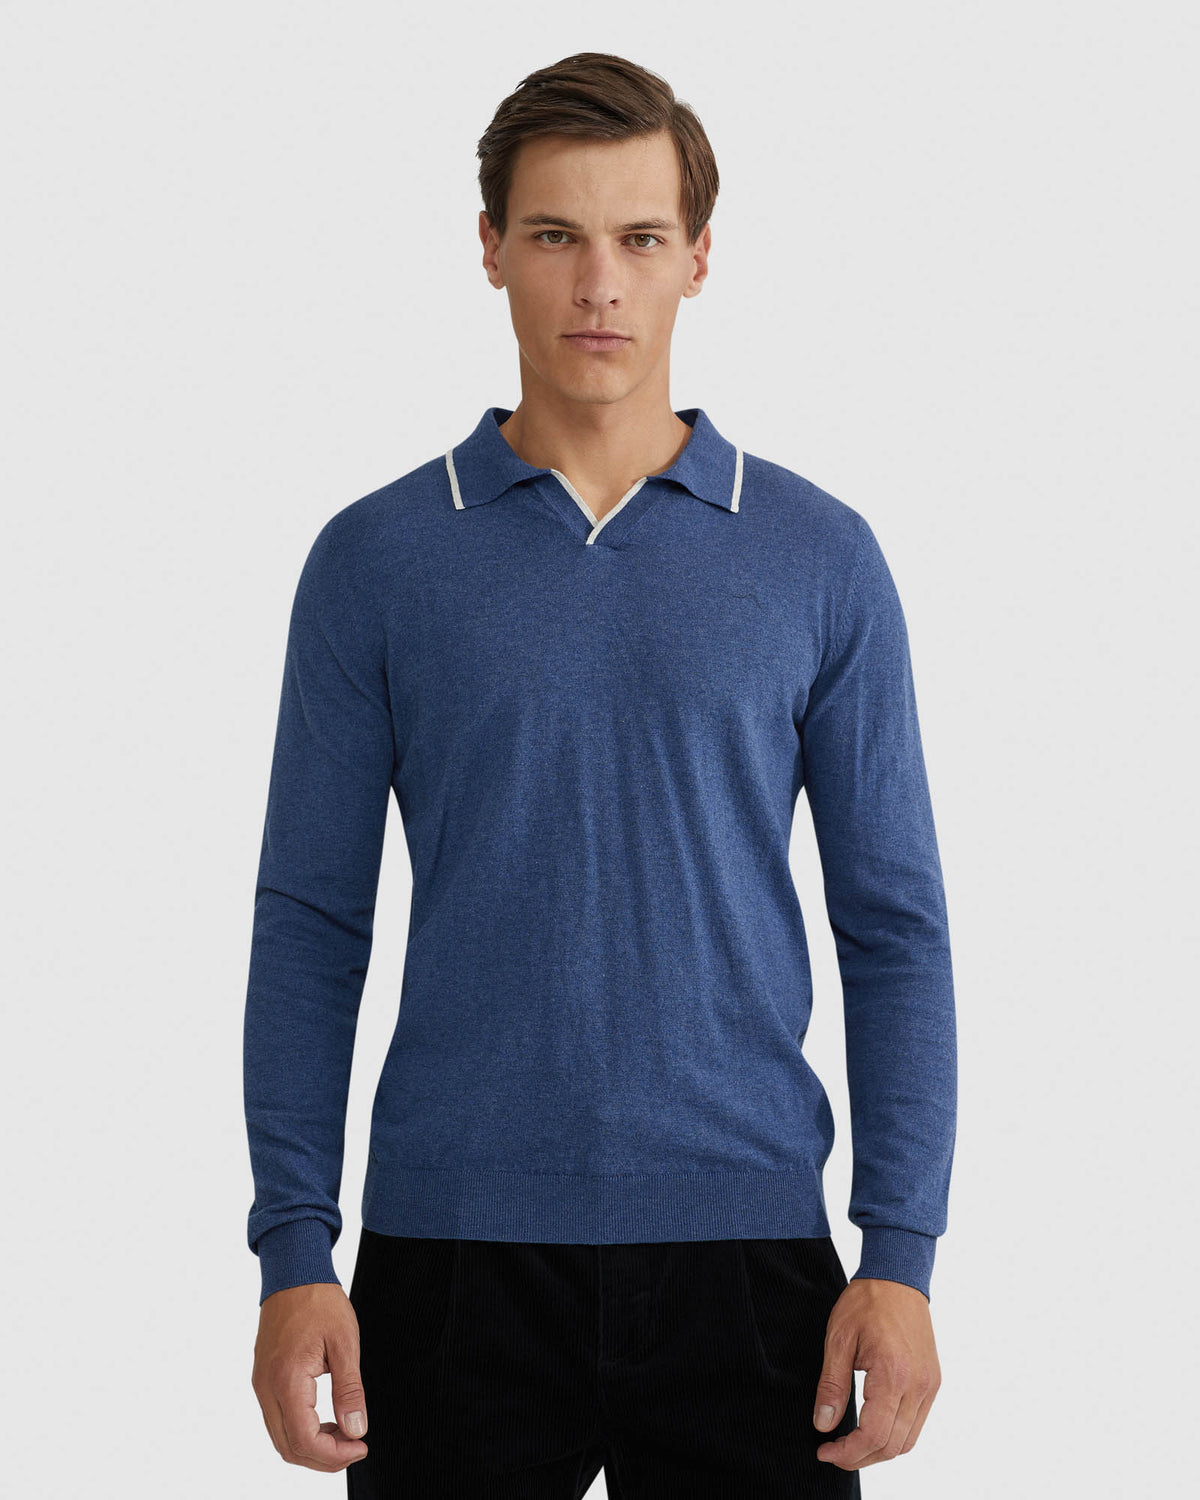 REISS TIPPING COLLAR LONG SLEEVE KNIT POLO MENS KNITWEAR